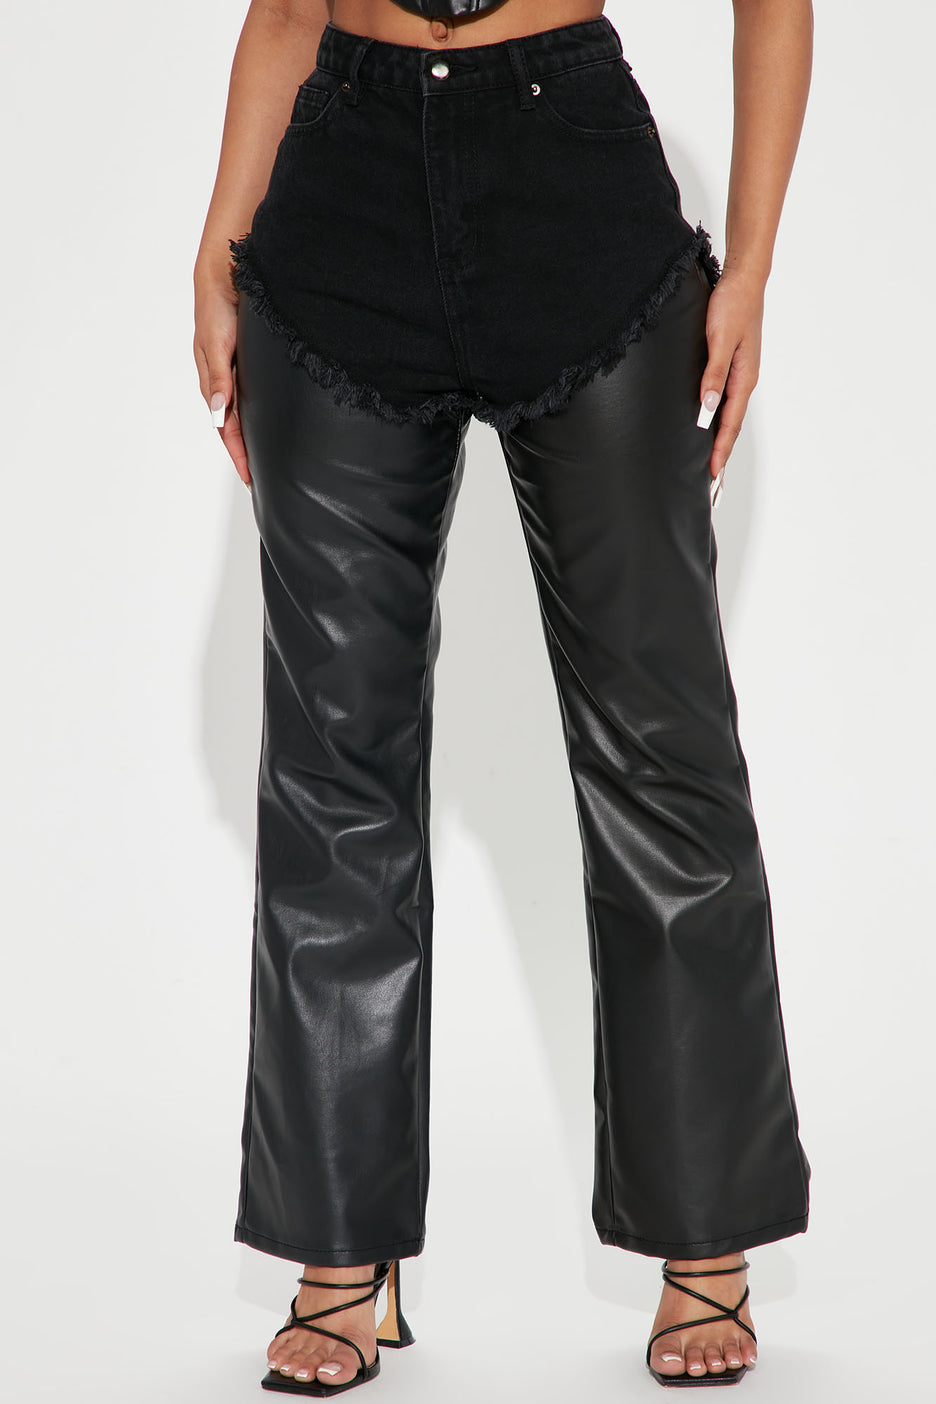 Petite Just In Time Faux Leather Pants 30